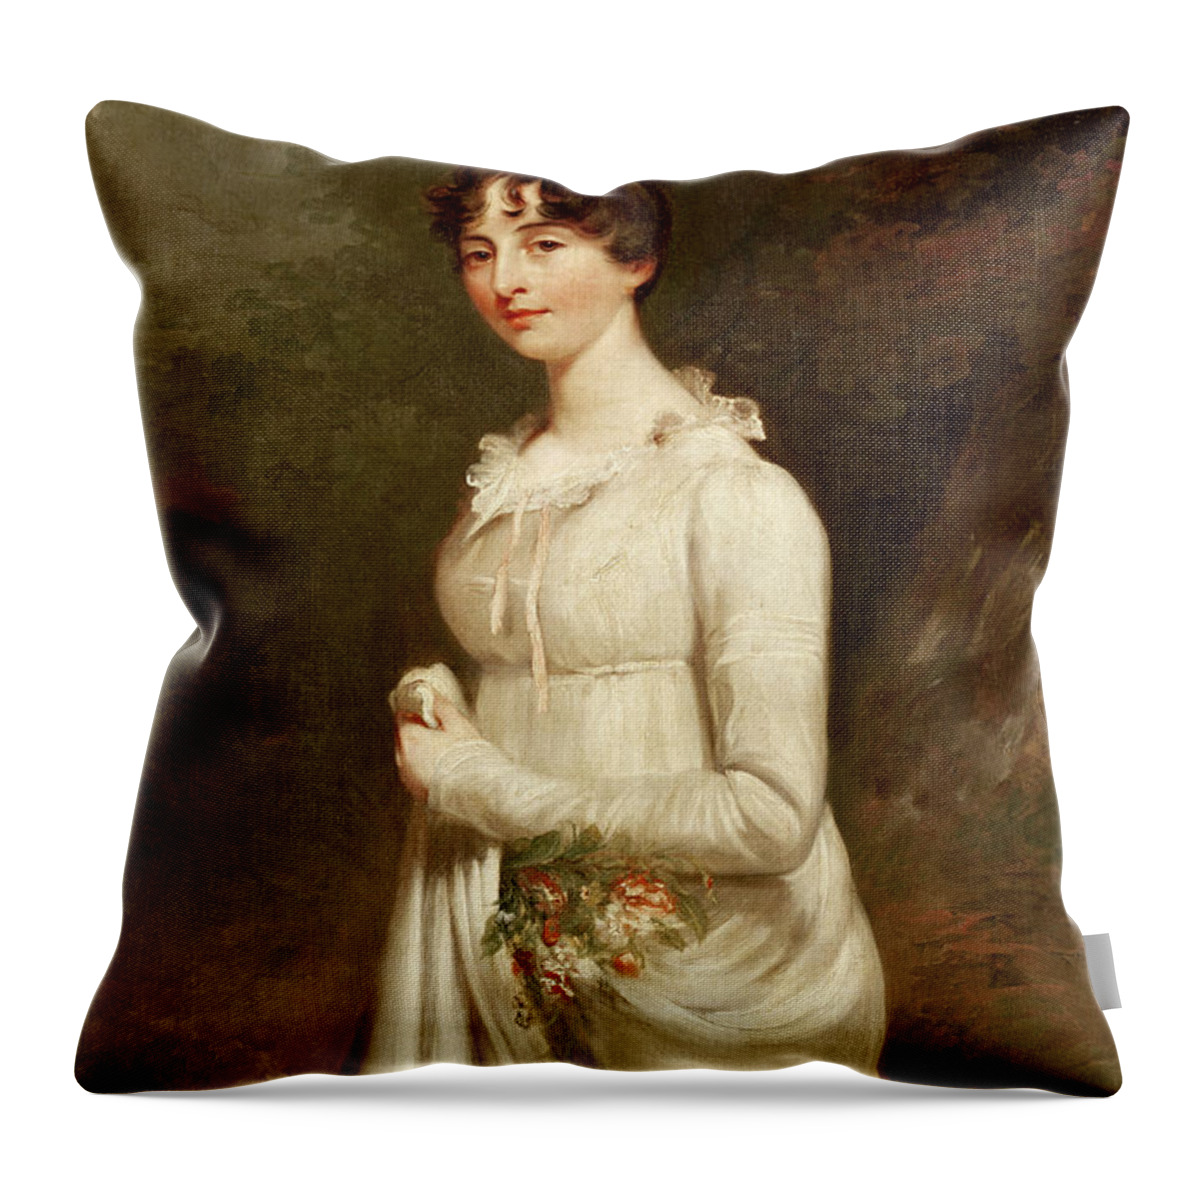 Female Throw Pillow featuring the painting Portrait Of Marcia B Fox by William Beechey